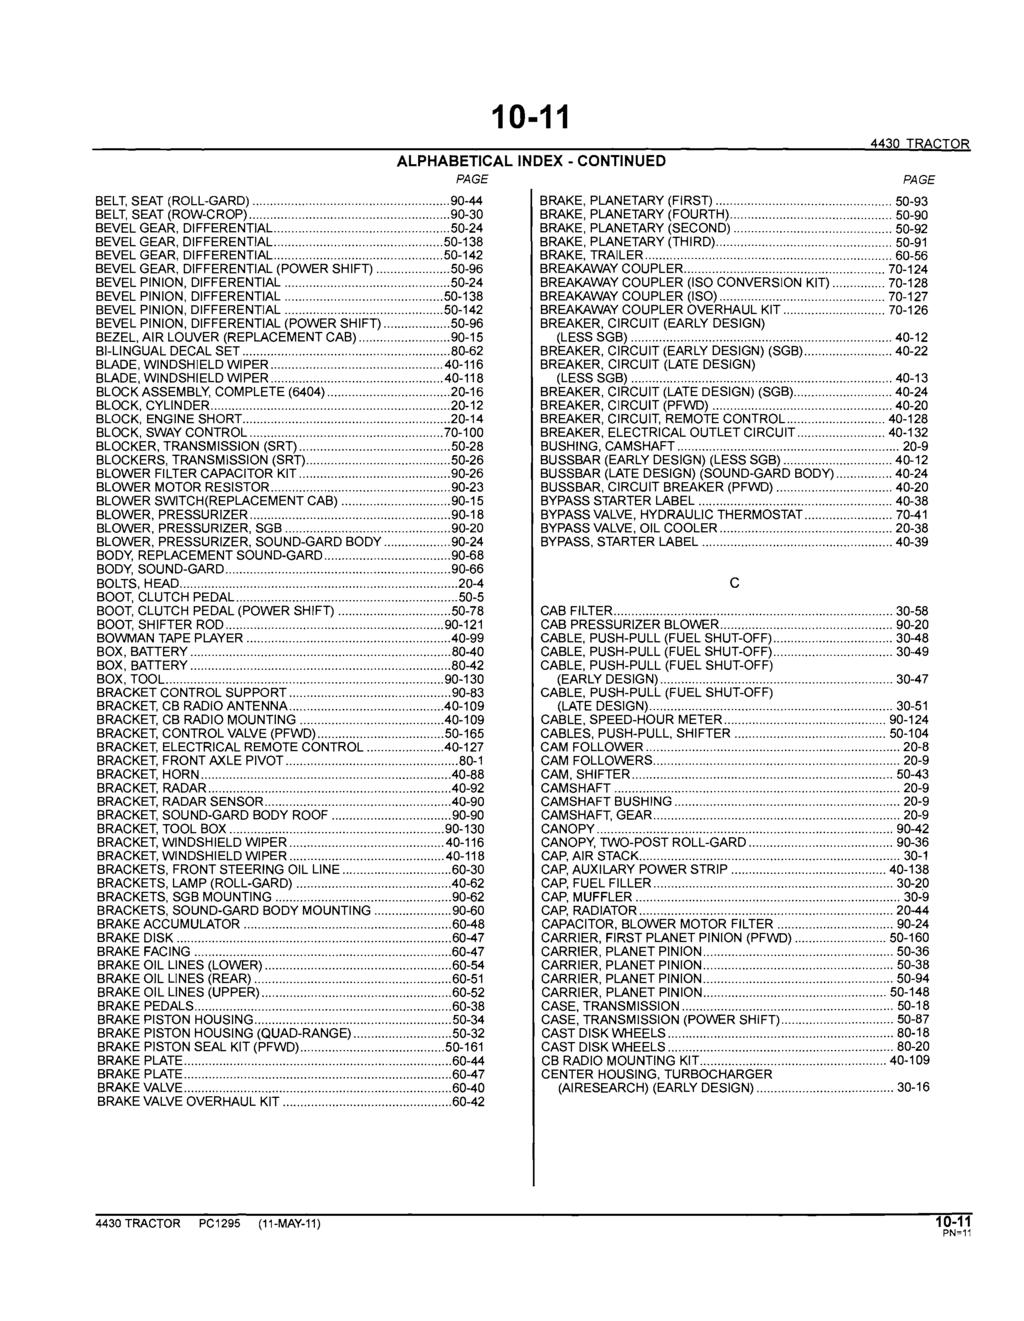 10-11 ALPHABETICAL INDEX - CONTINUED PAGE 4430 TRACTOR BELT, SEAT (ROLL-GARD)... 90-44 BRAKE, PLANETARY (FIRST)... 50-93 BELT, SEAT (ROW-CROP)... 90-30 BRAKE, PLANETARY (FOURTH}.